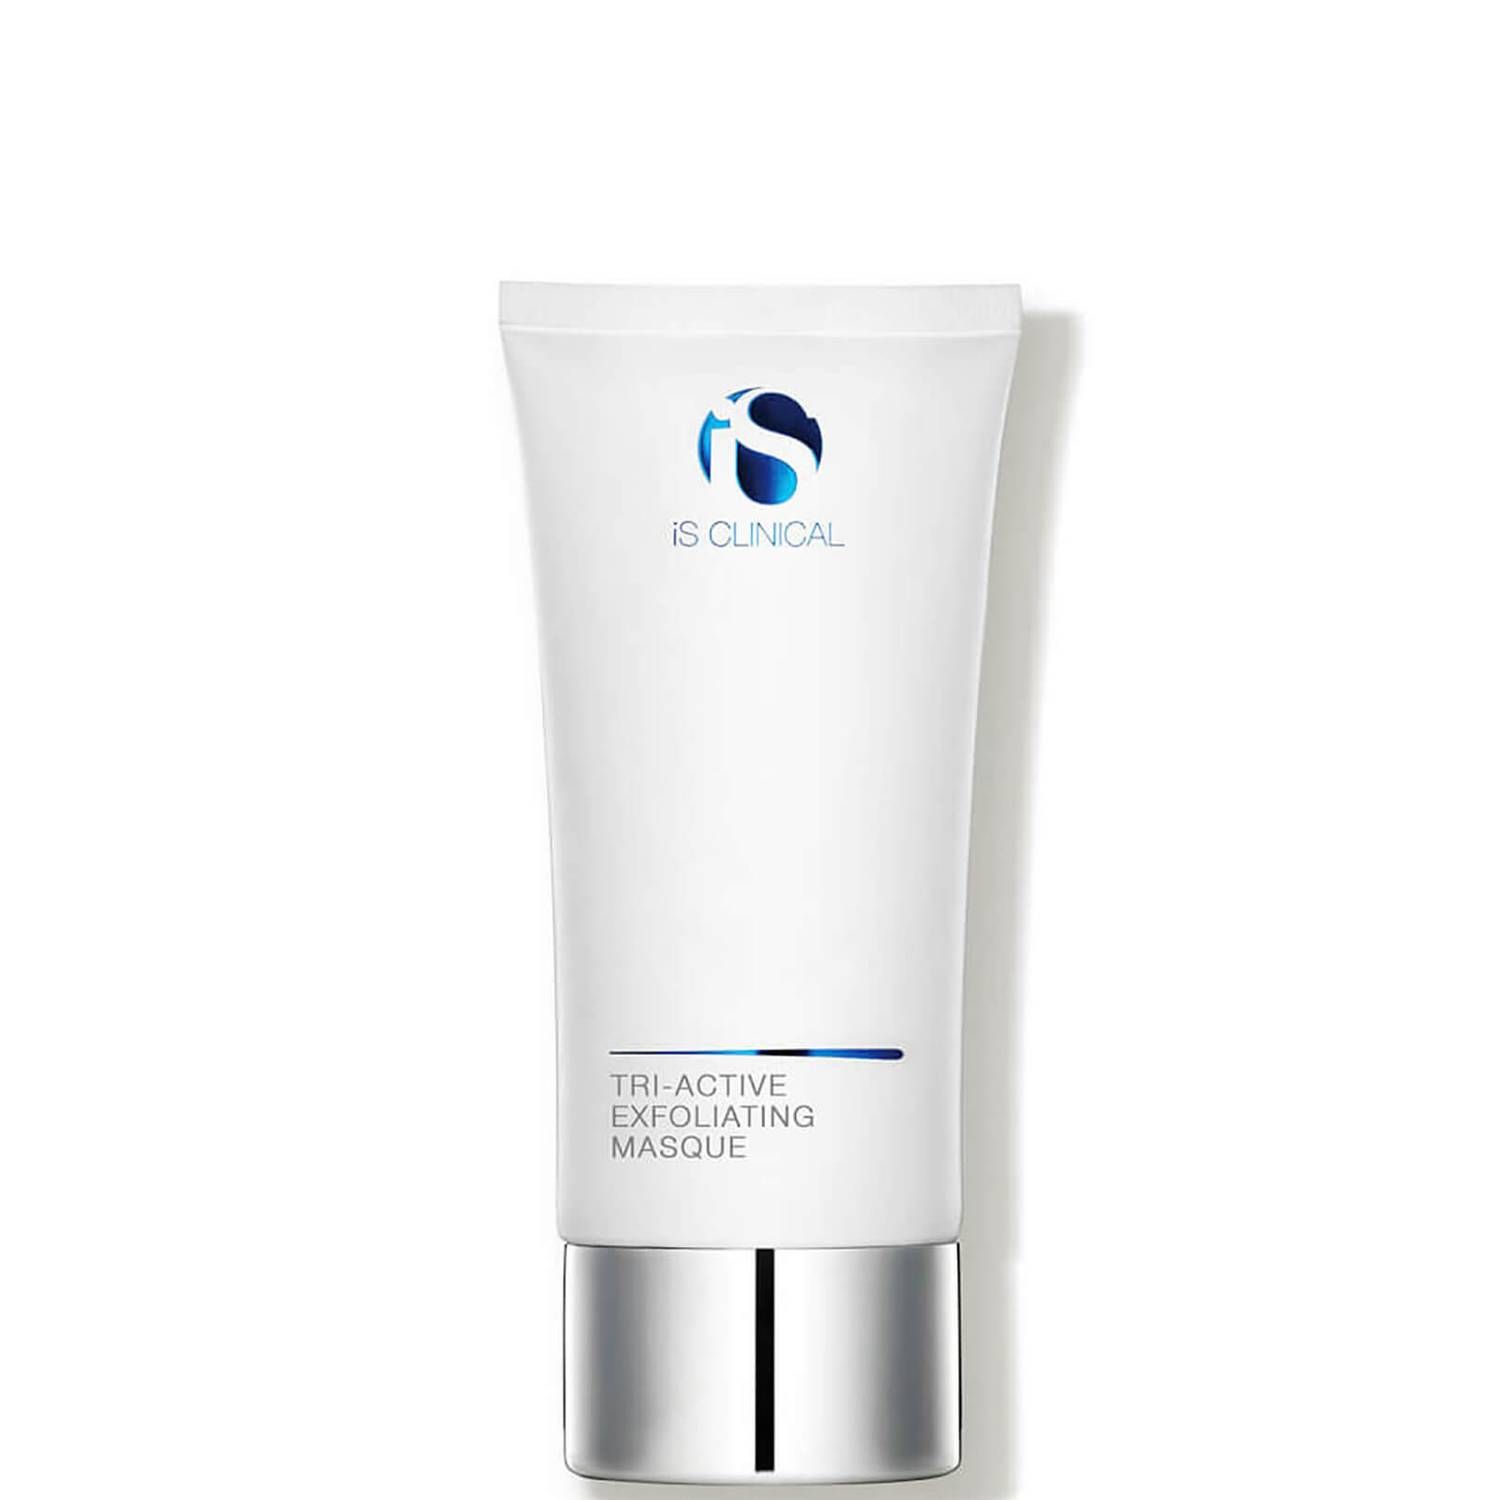 iS Clinical Tri-Active Exfoliating Masque (4 oz.) | Dermstore (US)